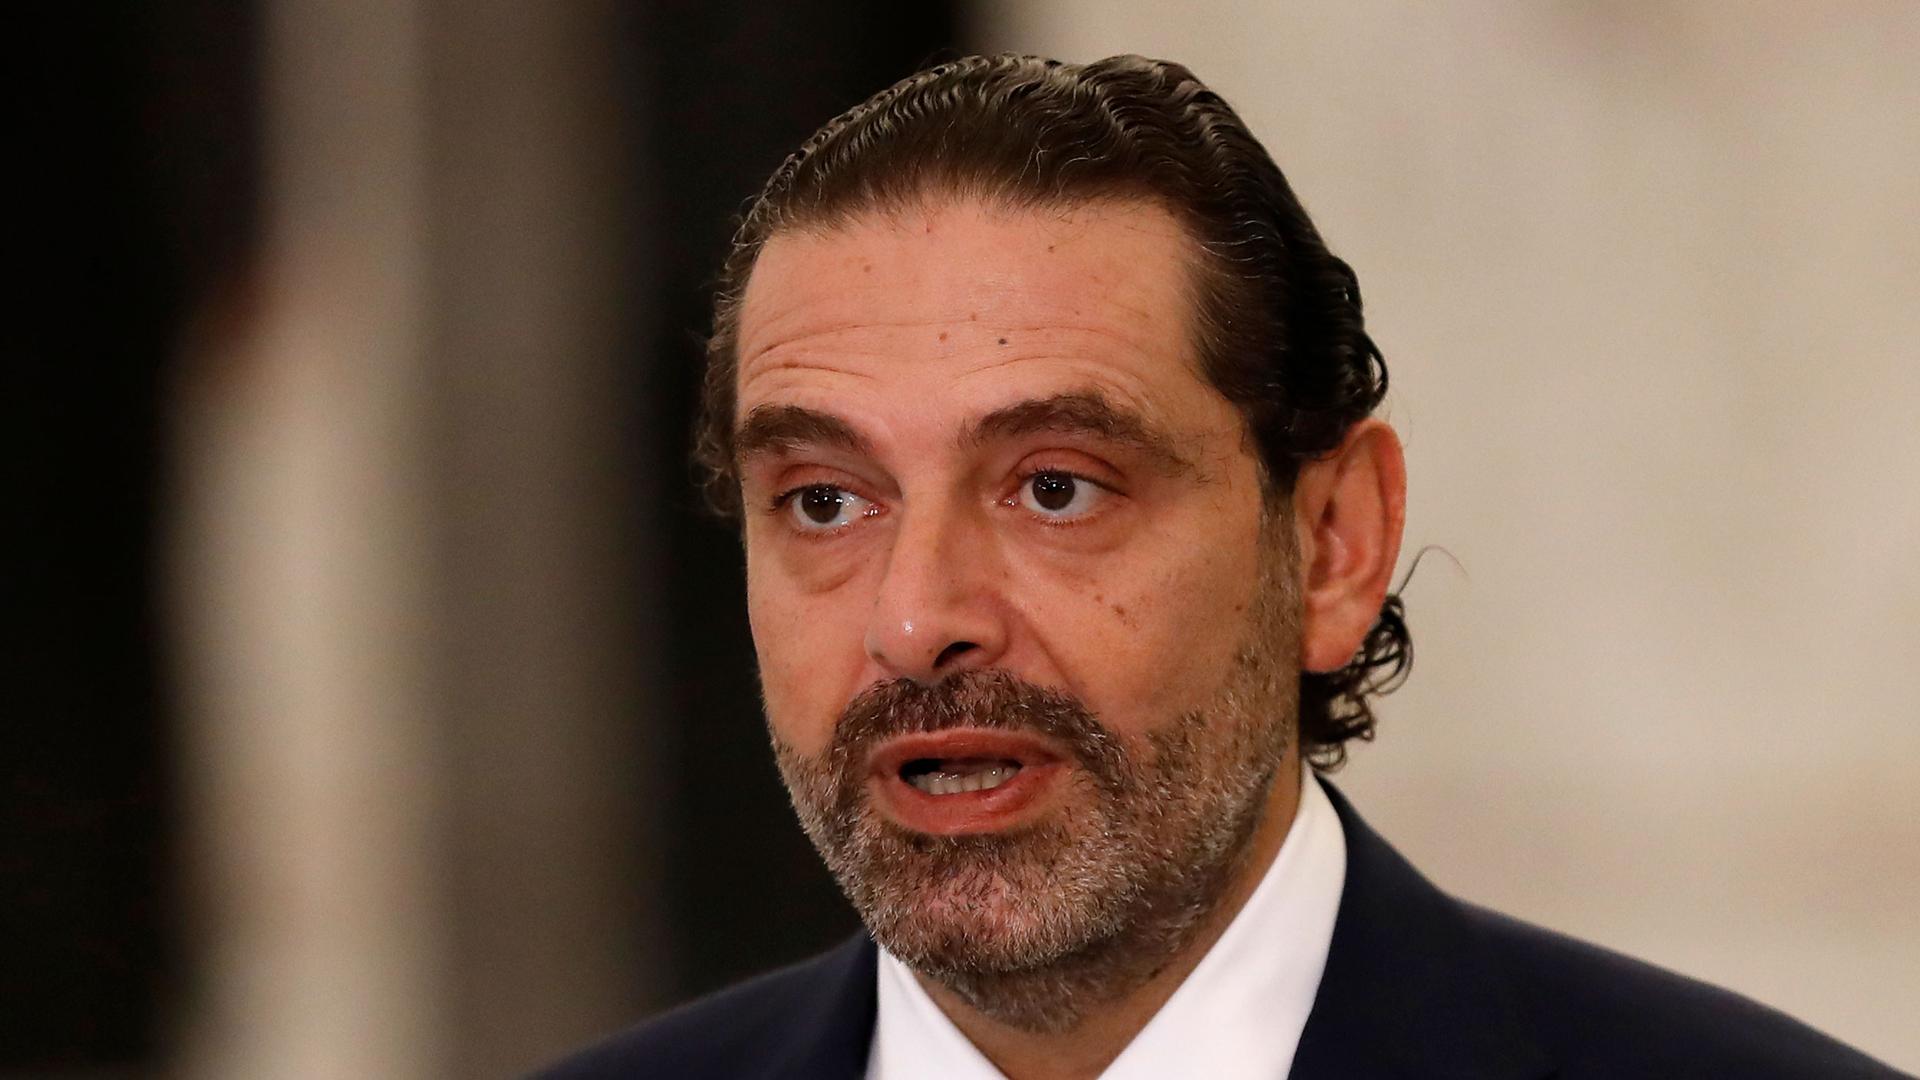 Lebanese Prime Minister-Designate Saad Hariri is show with his hair slicked back and wearing a dark suit.